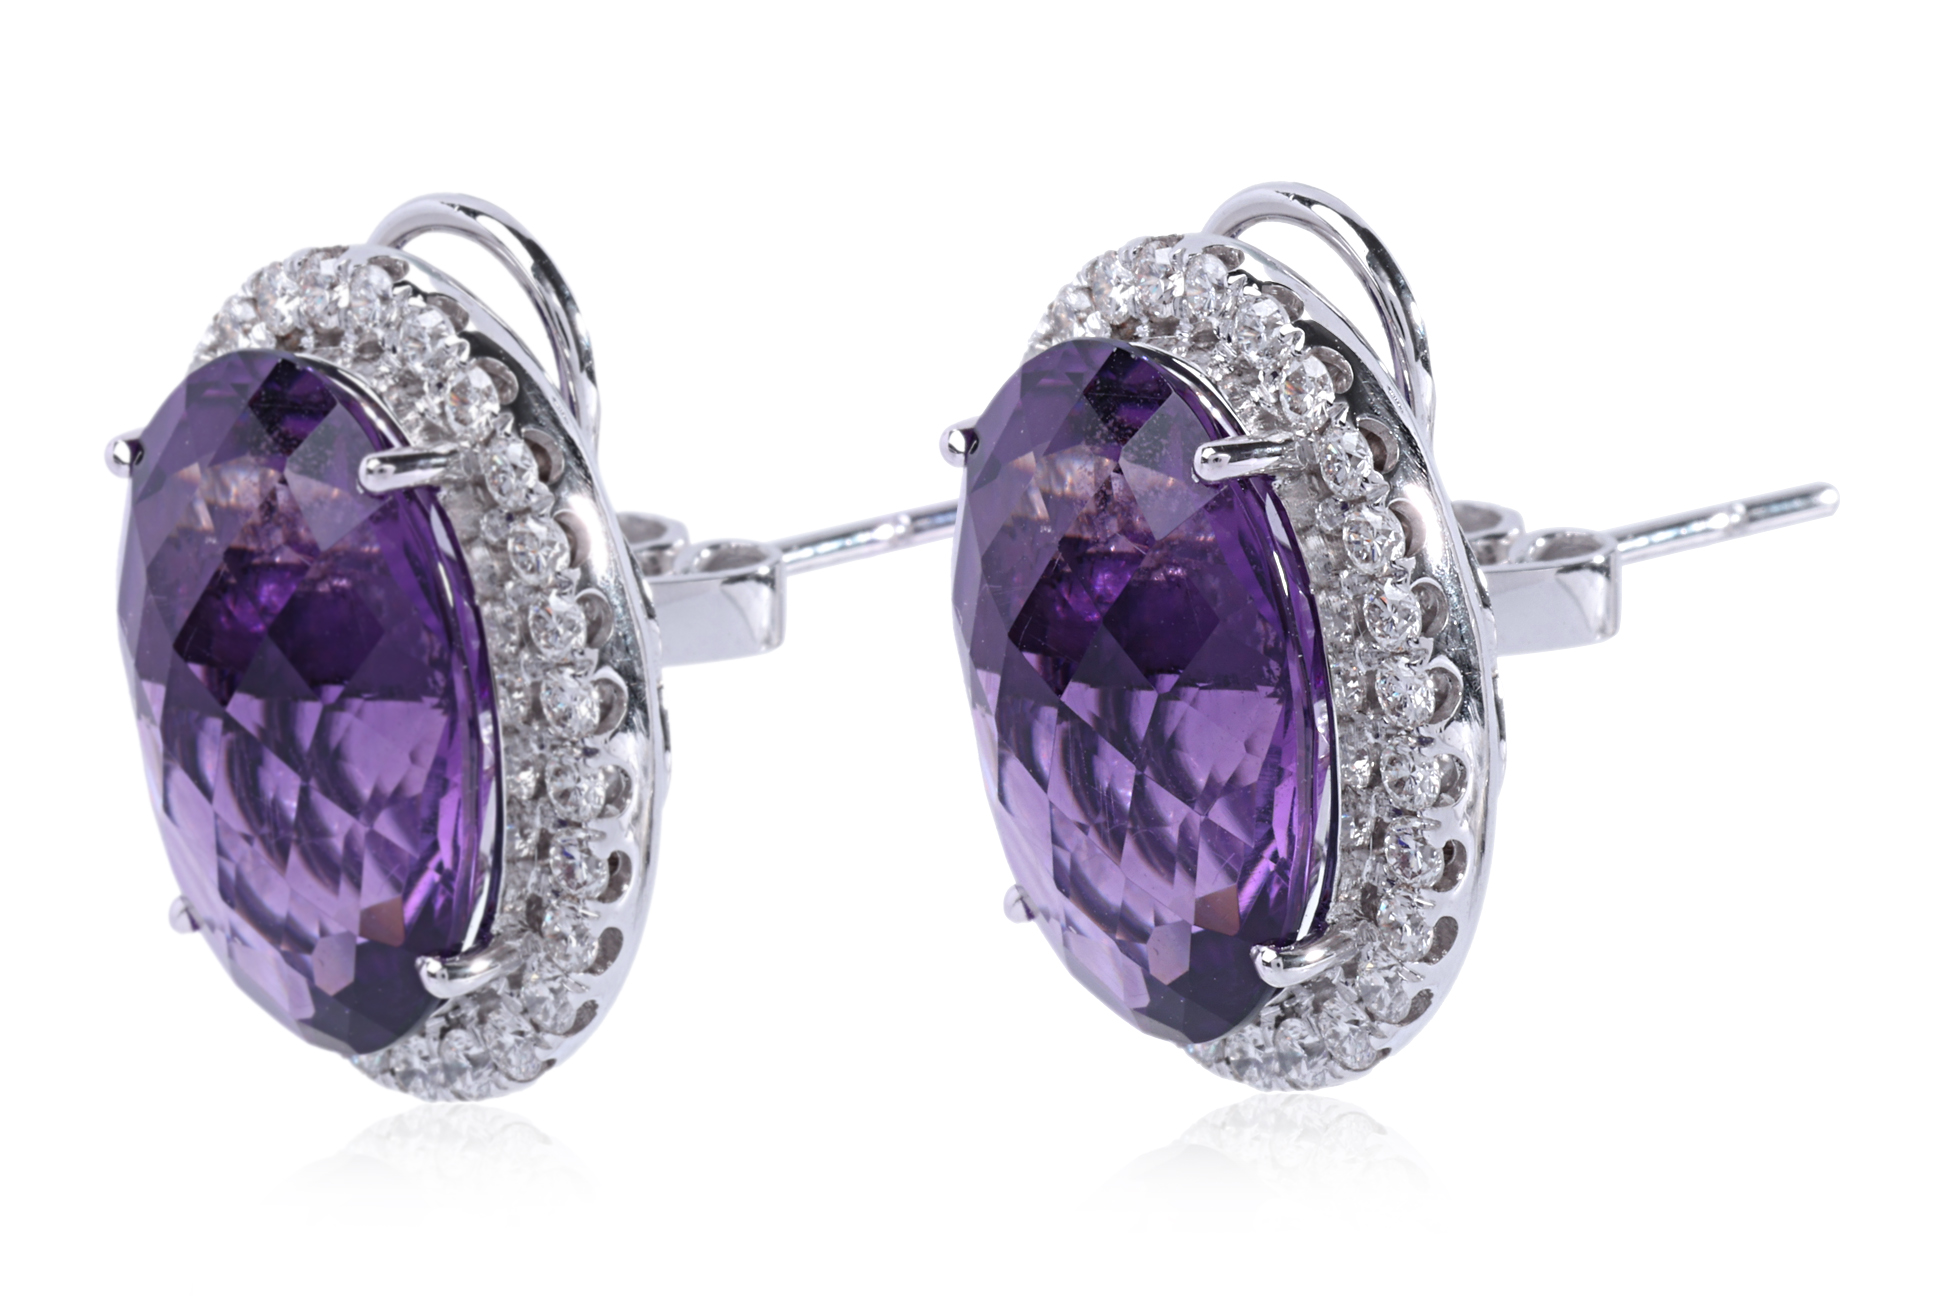 A PAIR OF AMETHYST AND DIAMOND STUD EARRINGS - Image 2 of 3